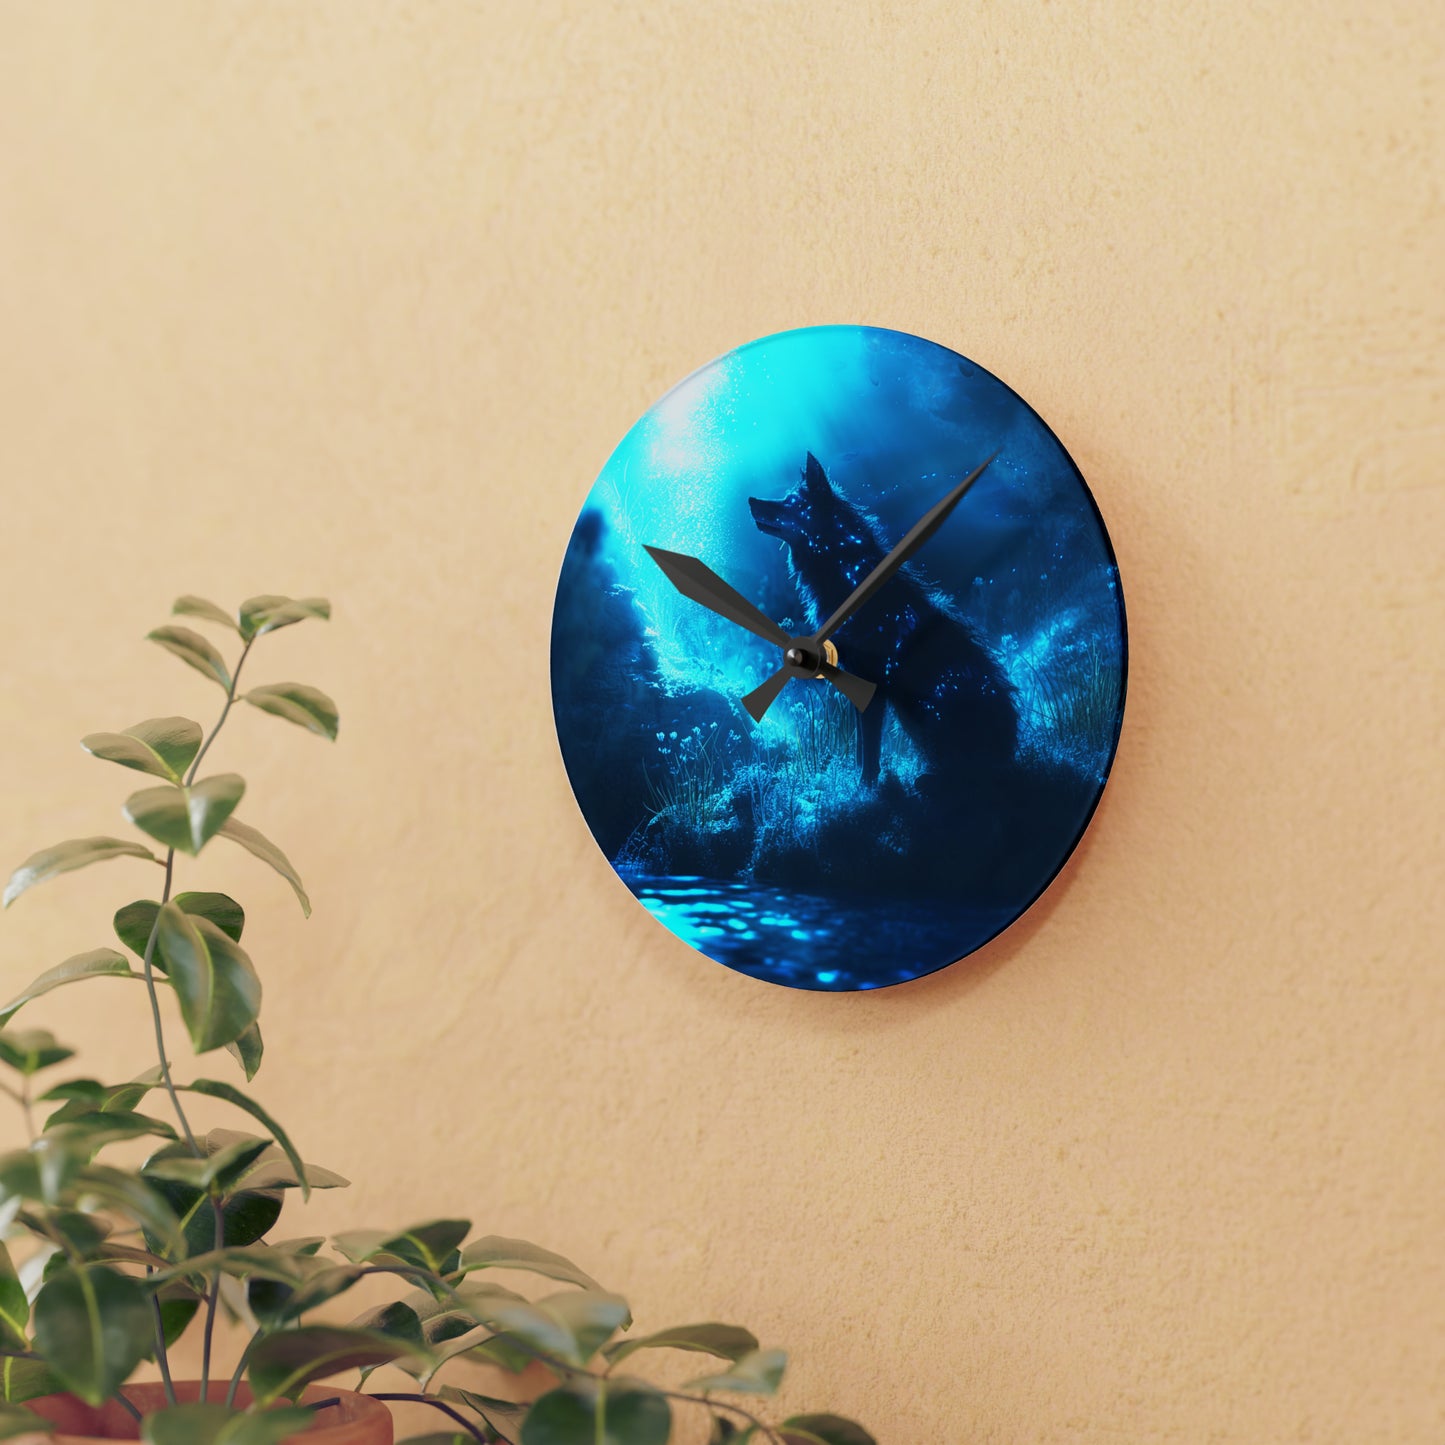 Neduz Acrylic Spirit Wolf Wall Clock - Mystical Forest Wolf Clock in Round or Square Shape